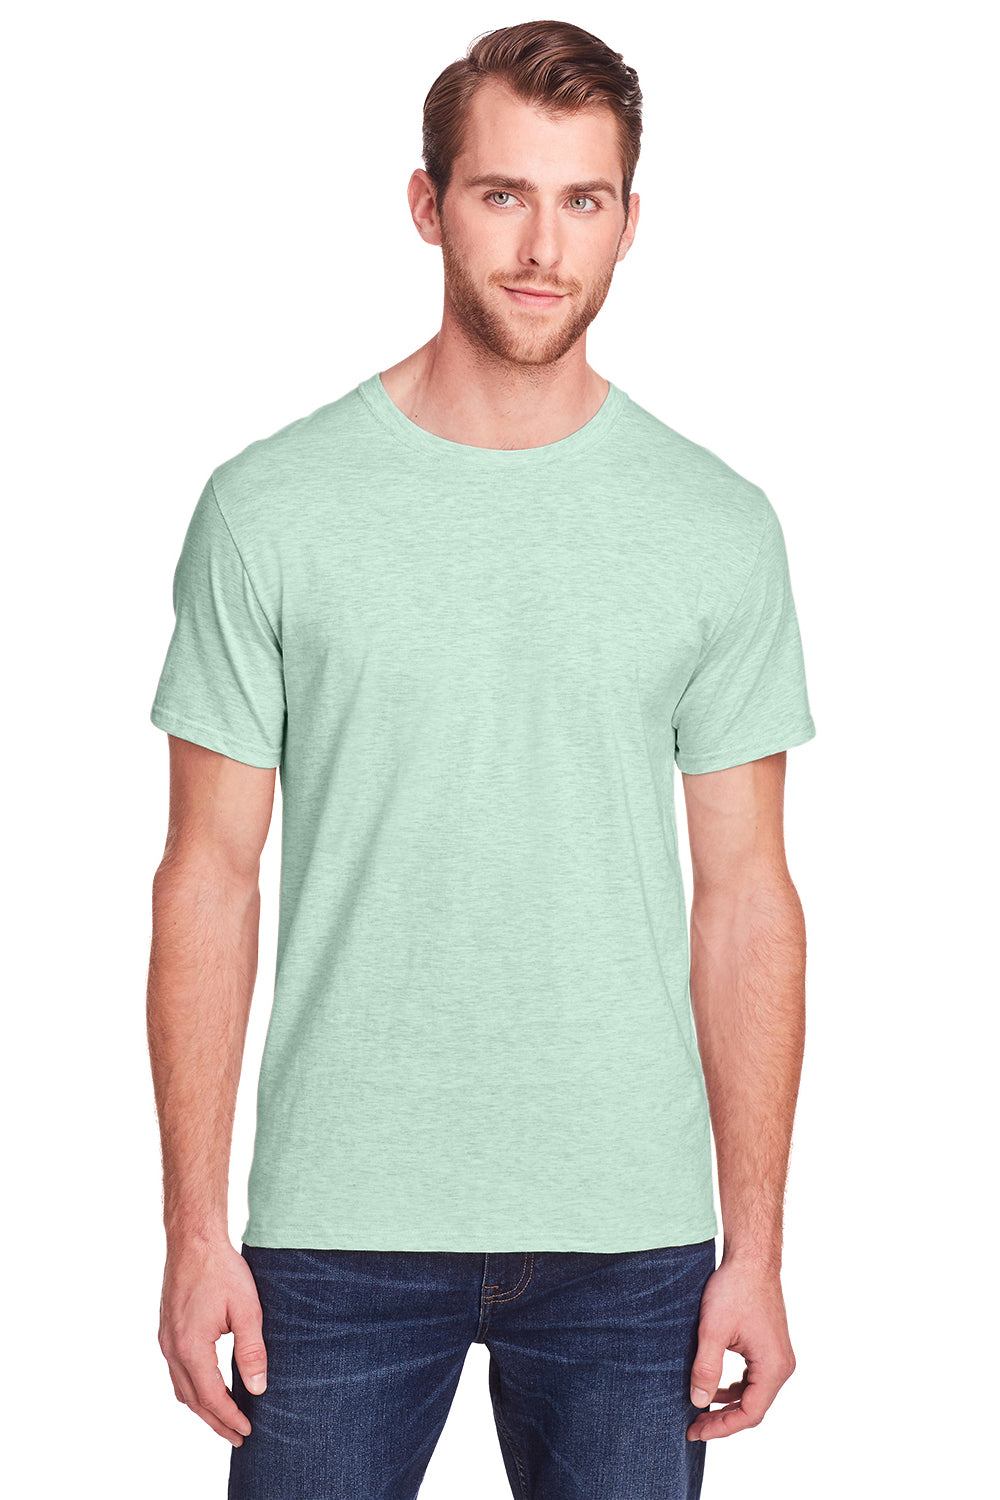 Fruit Of The Loom IC47MR Mens Iconic Short Sleeve Crewneck T-Shirt Heather Mint Green Front